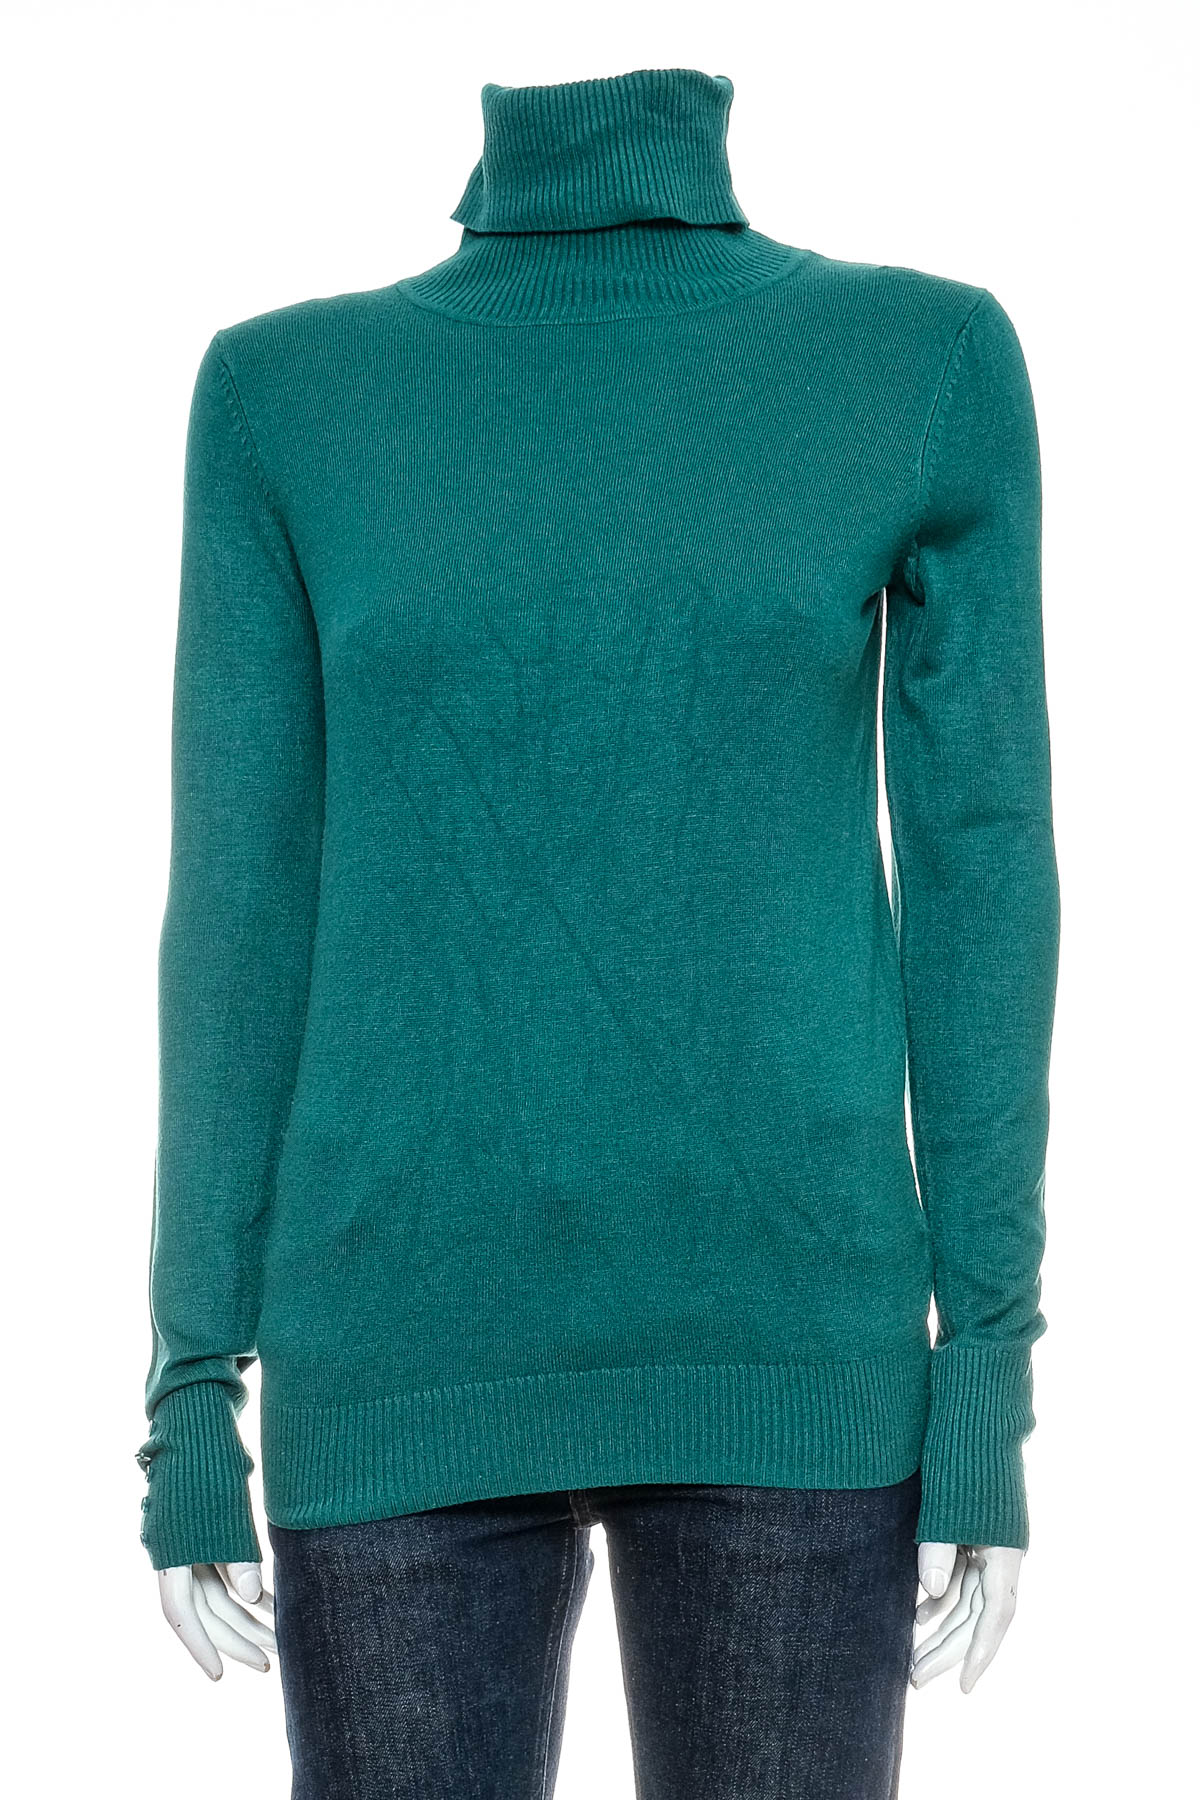 Women's sweater - COLOURS OF THE WORLD - 0